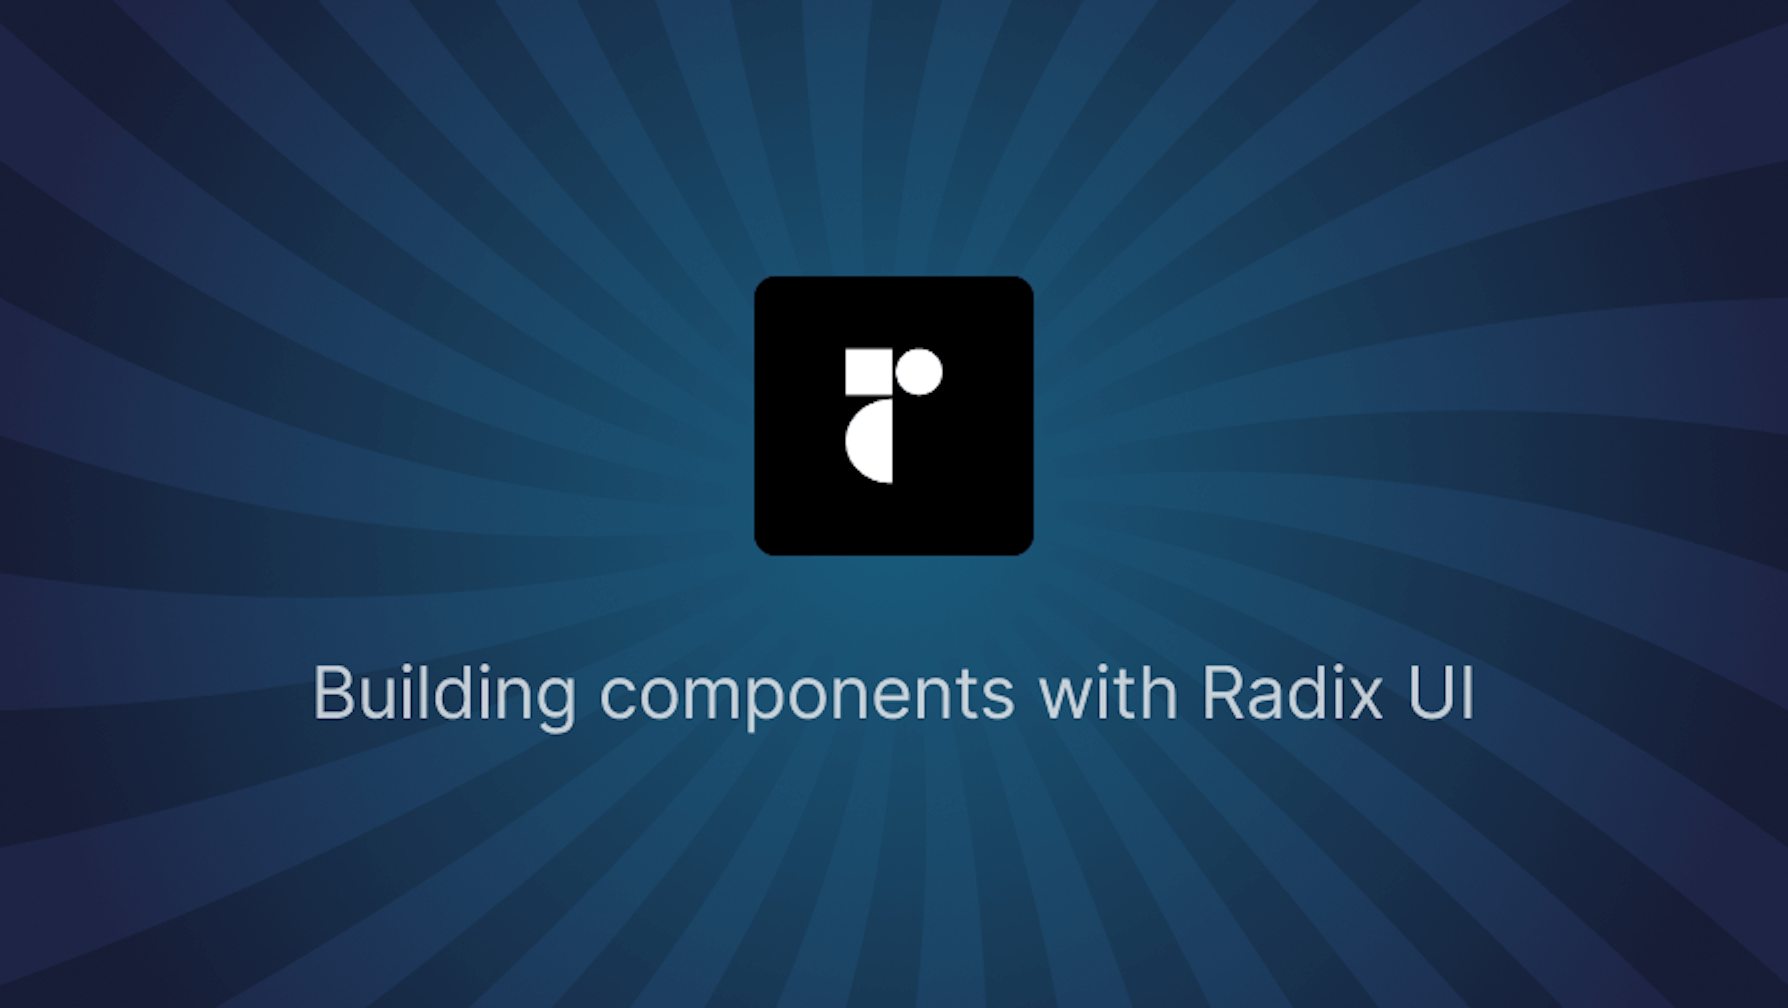 Building components with Radix UI